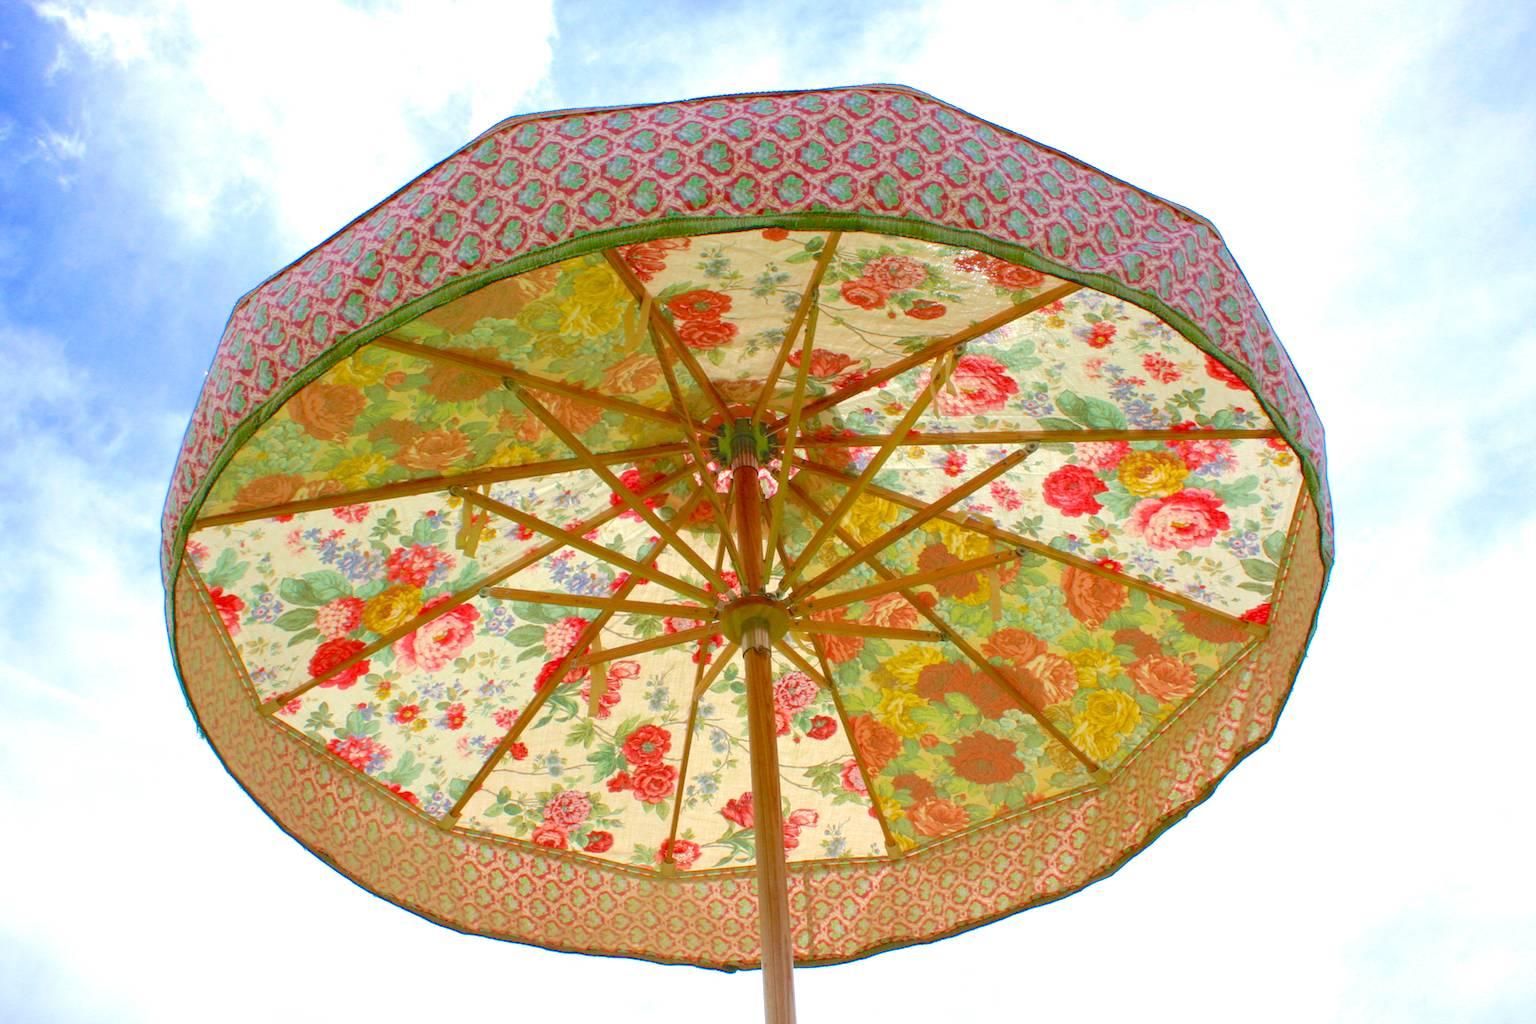 Sunbeam Jackie's iconic contemporary parasols are unique one-off pieces, each parasol is made using it's own selection of heritage textiles. Displayed on Sunbeam Jackie's specially-crafted ash parasol frame, these parasols are objects of